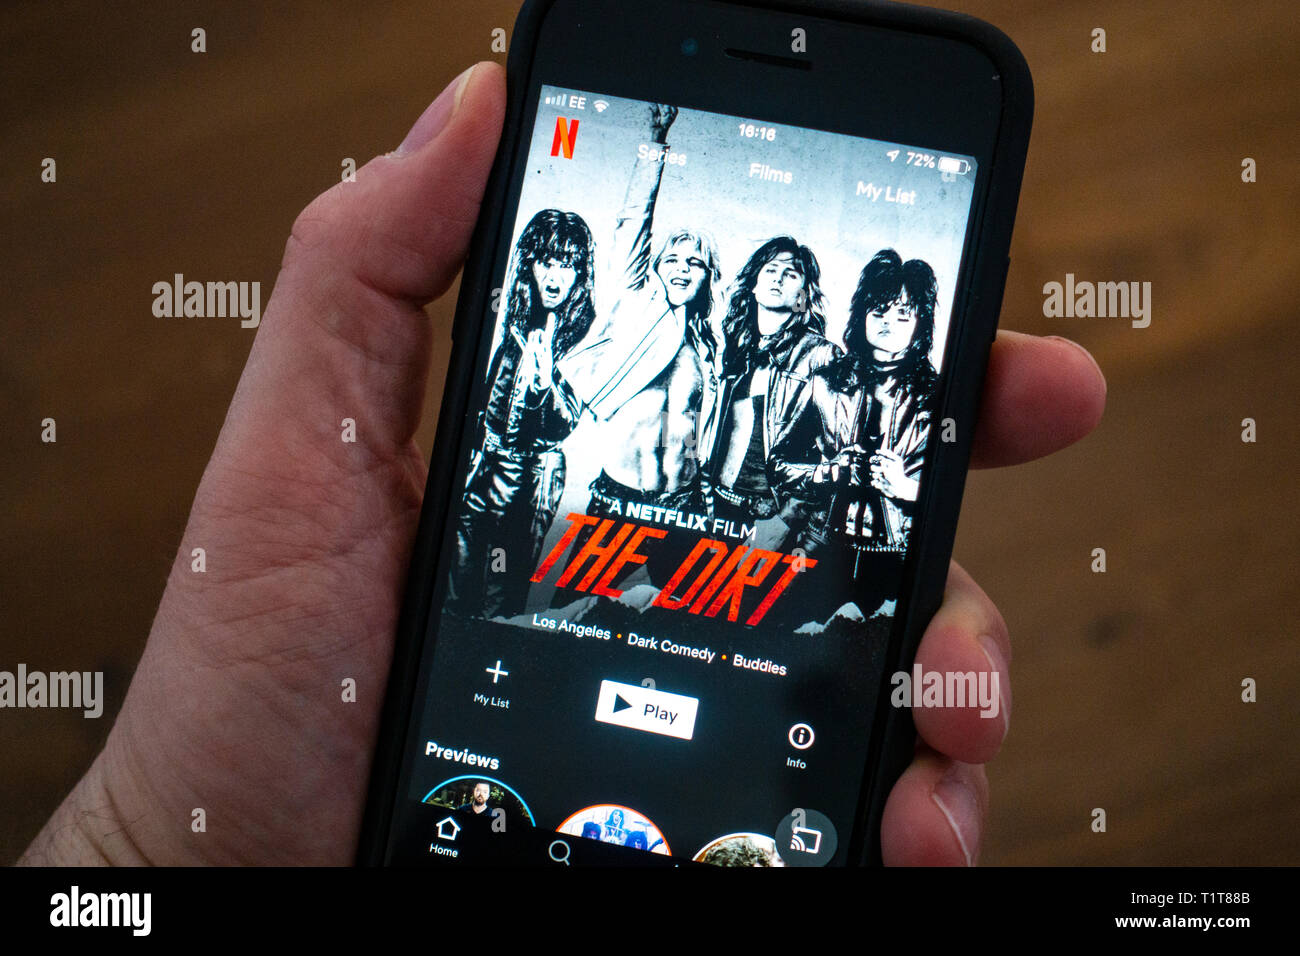 Using a mobile phone to browse Netflix movie streaming app Stock Photo